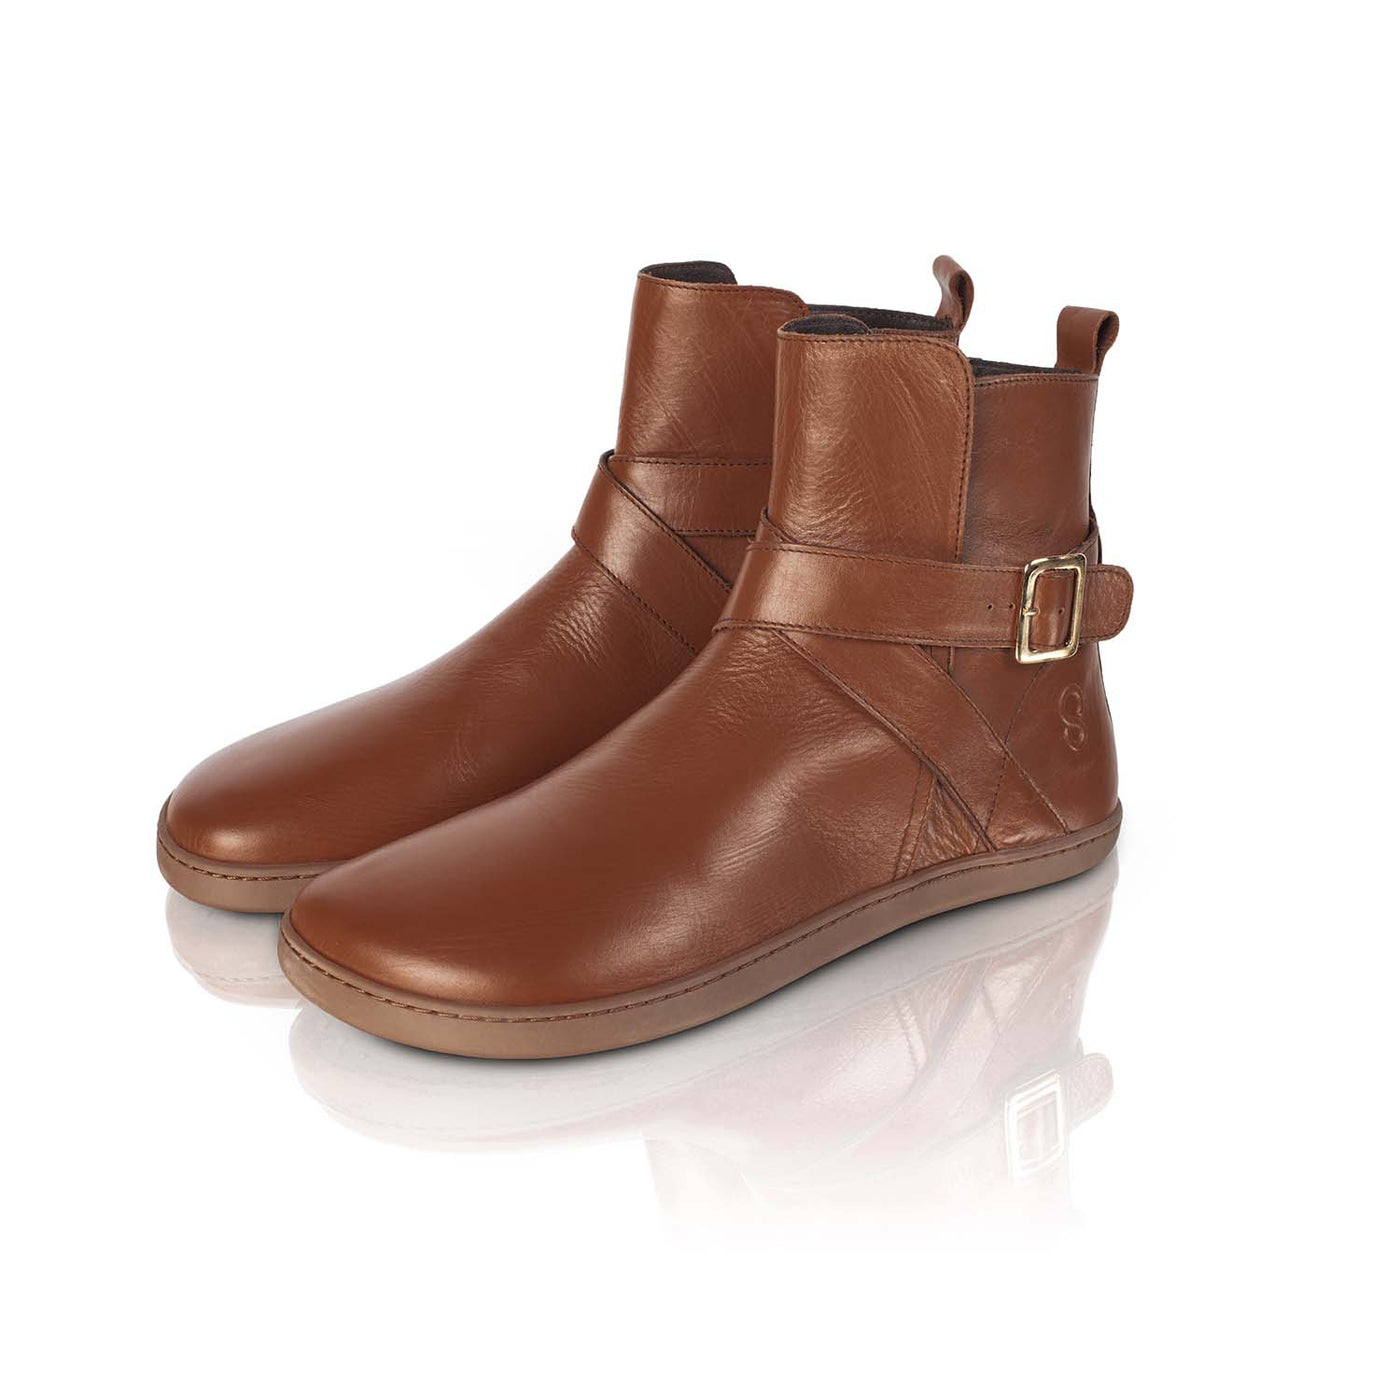 A photo of the Shapen Divine ankle boots made with a smooth leather upper, a microline lining, and rubber soles. The boots are brown in color and have an ankle strap with a gold buckle, as well as a side zipper. Both boots are shown together from the front left on a white background. #color_brown